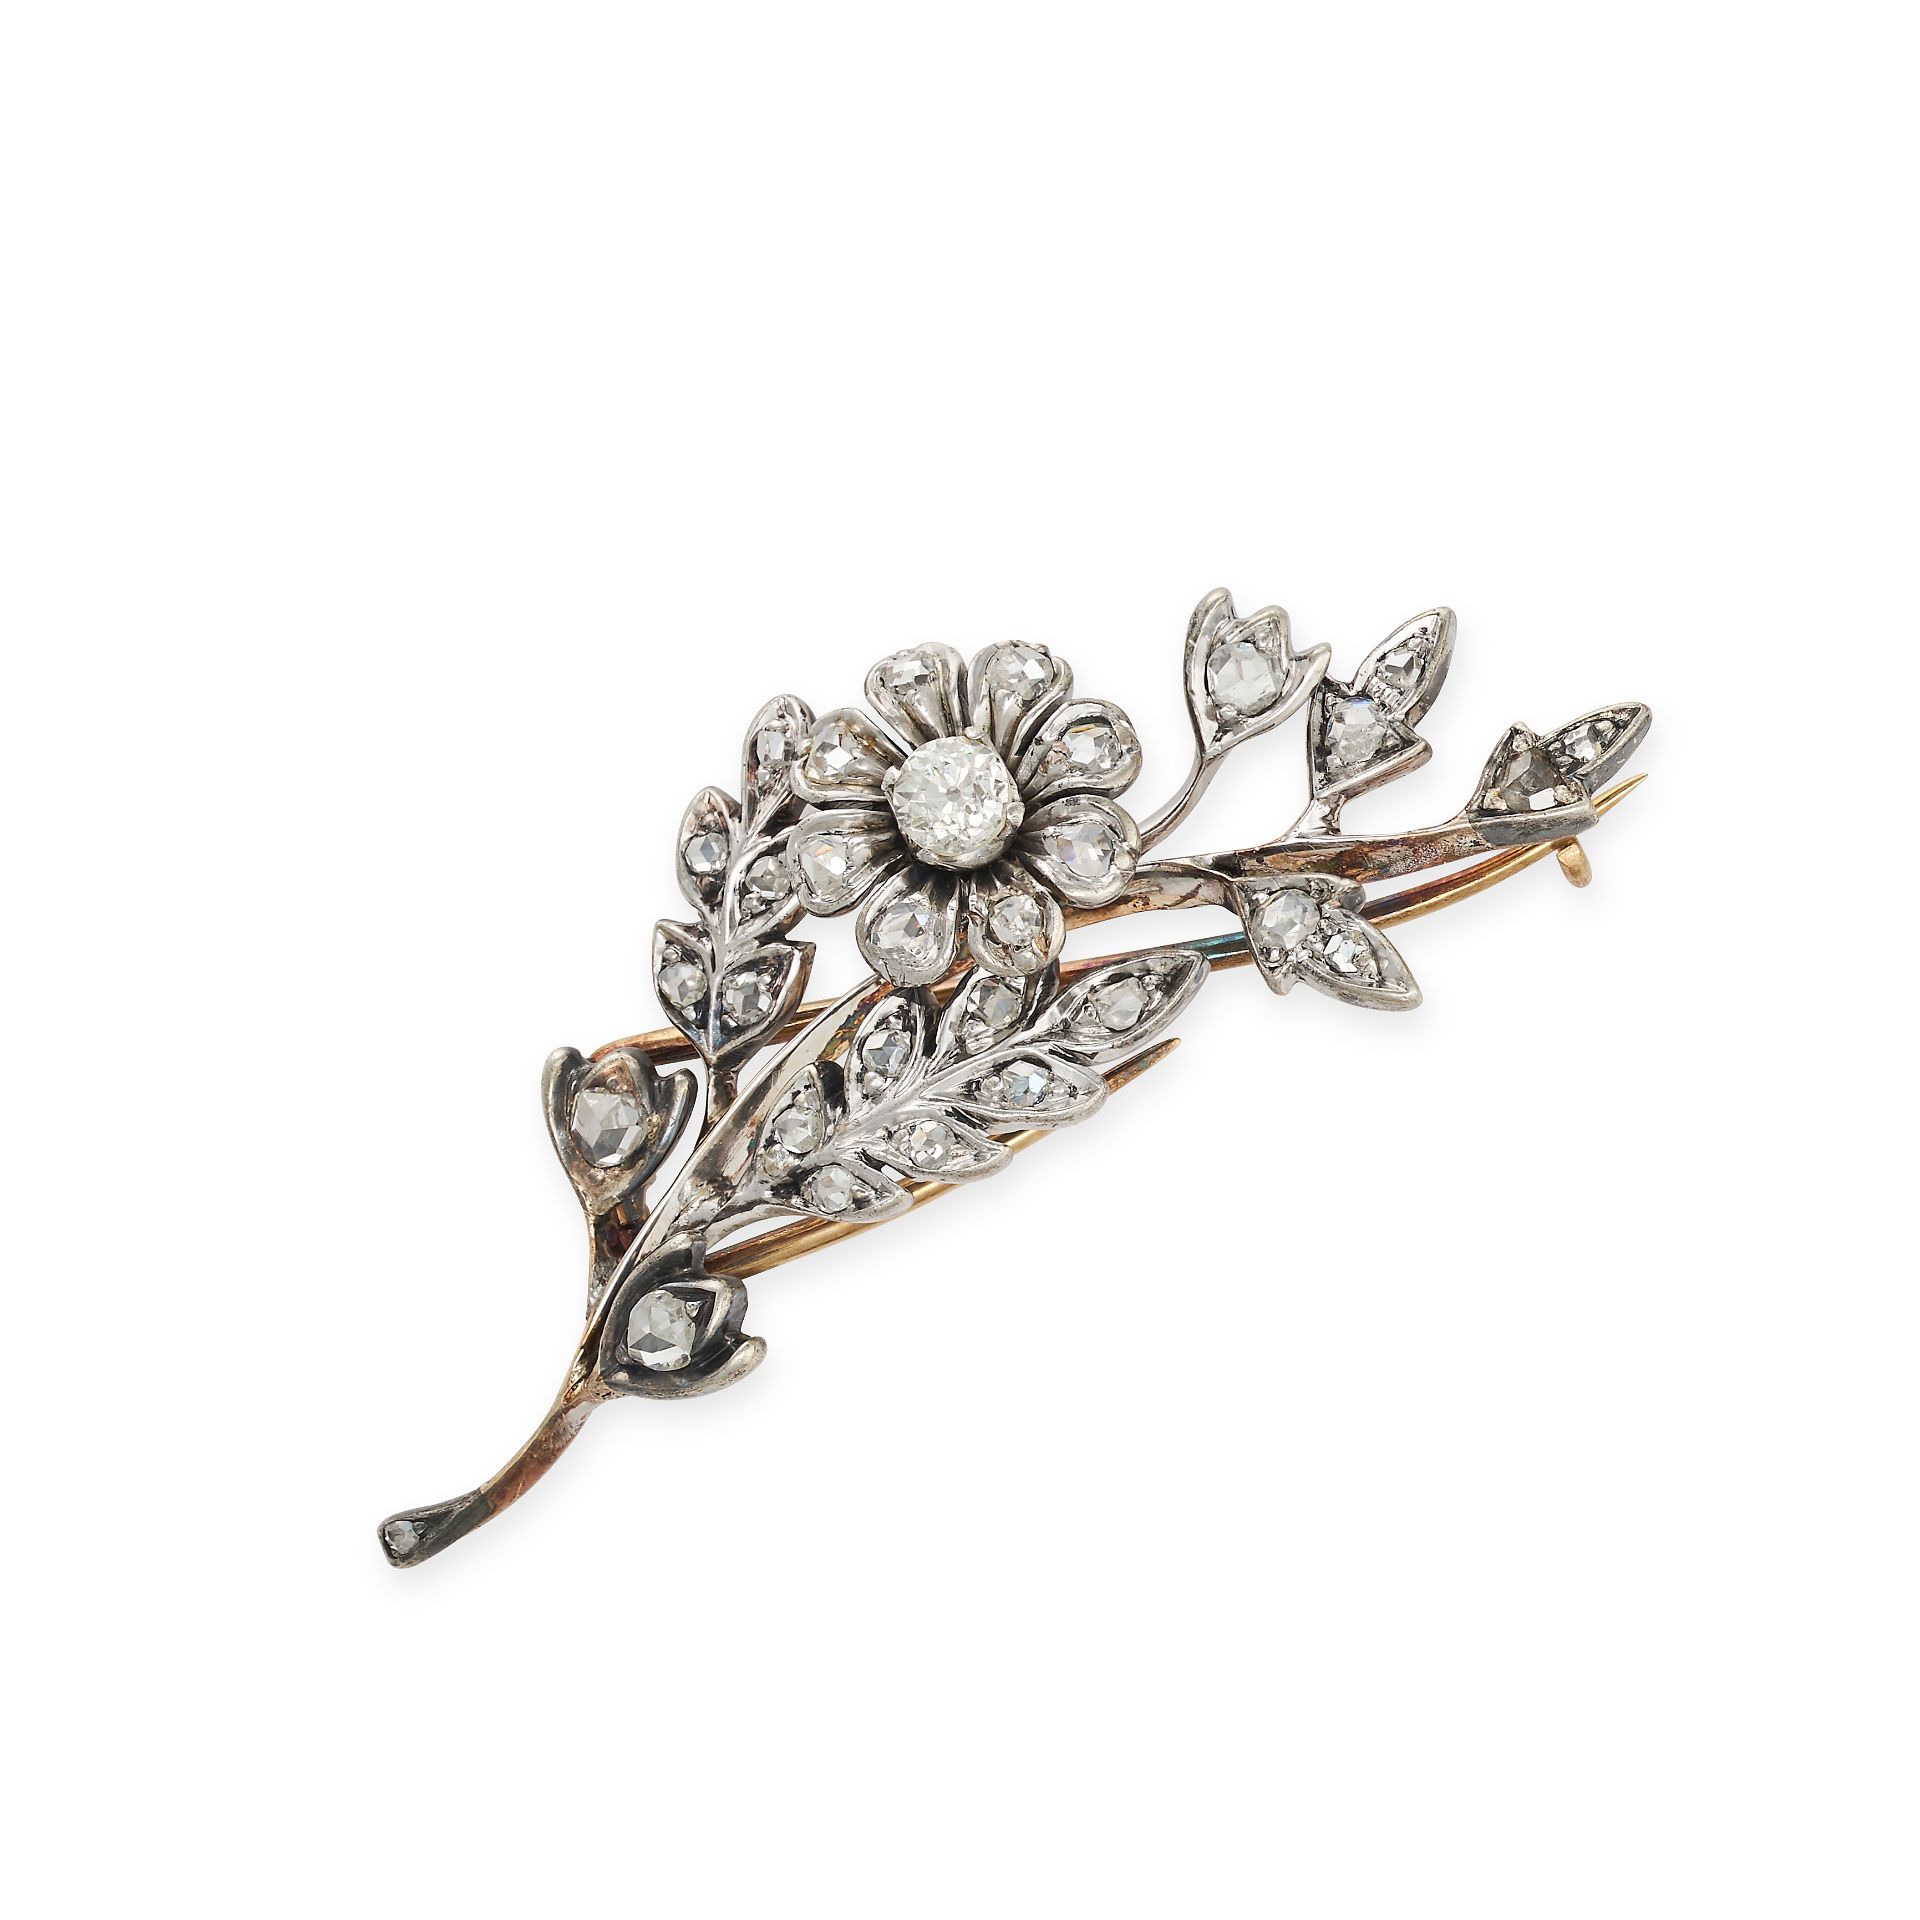 AN ANTIQUE DIAMOND FLORAL SPRAY BROOCH in yellow gold and silver, designed as a floral spray, set...